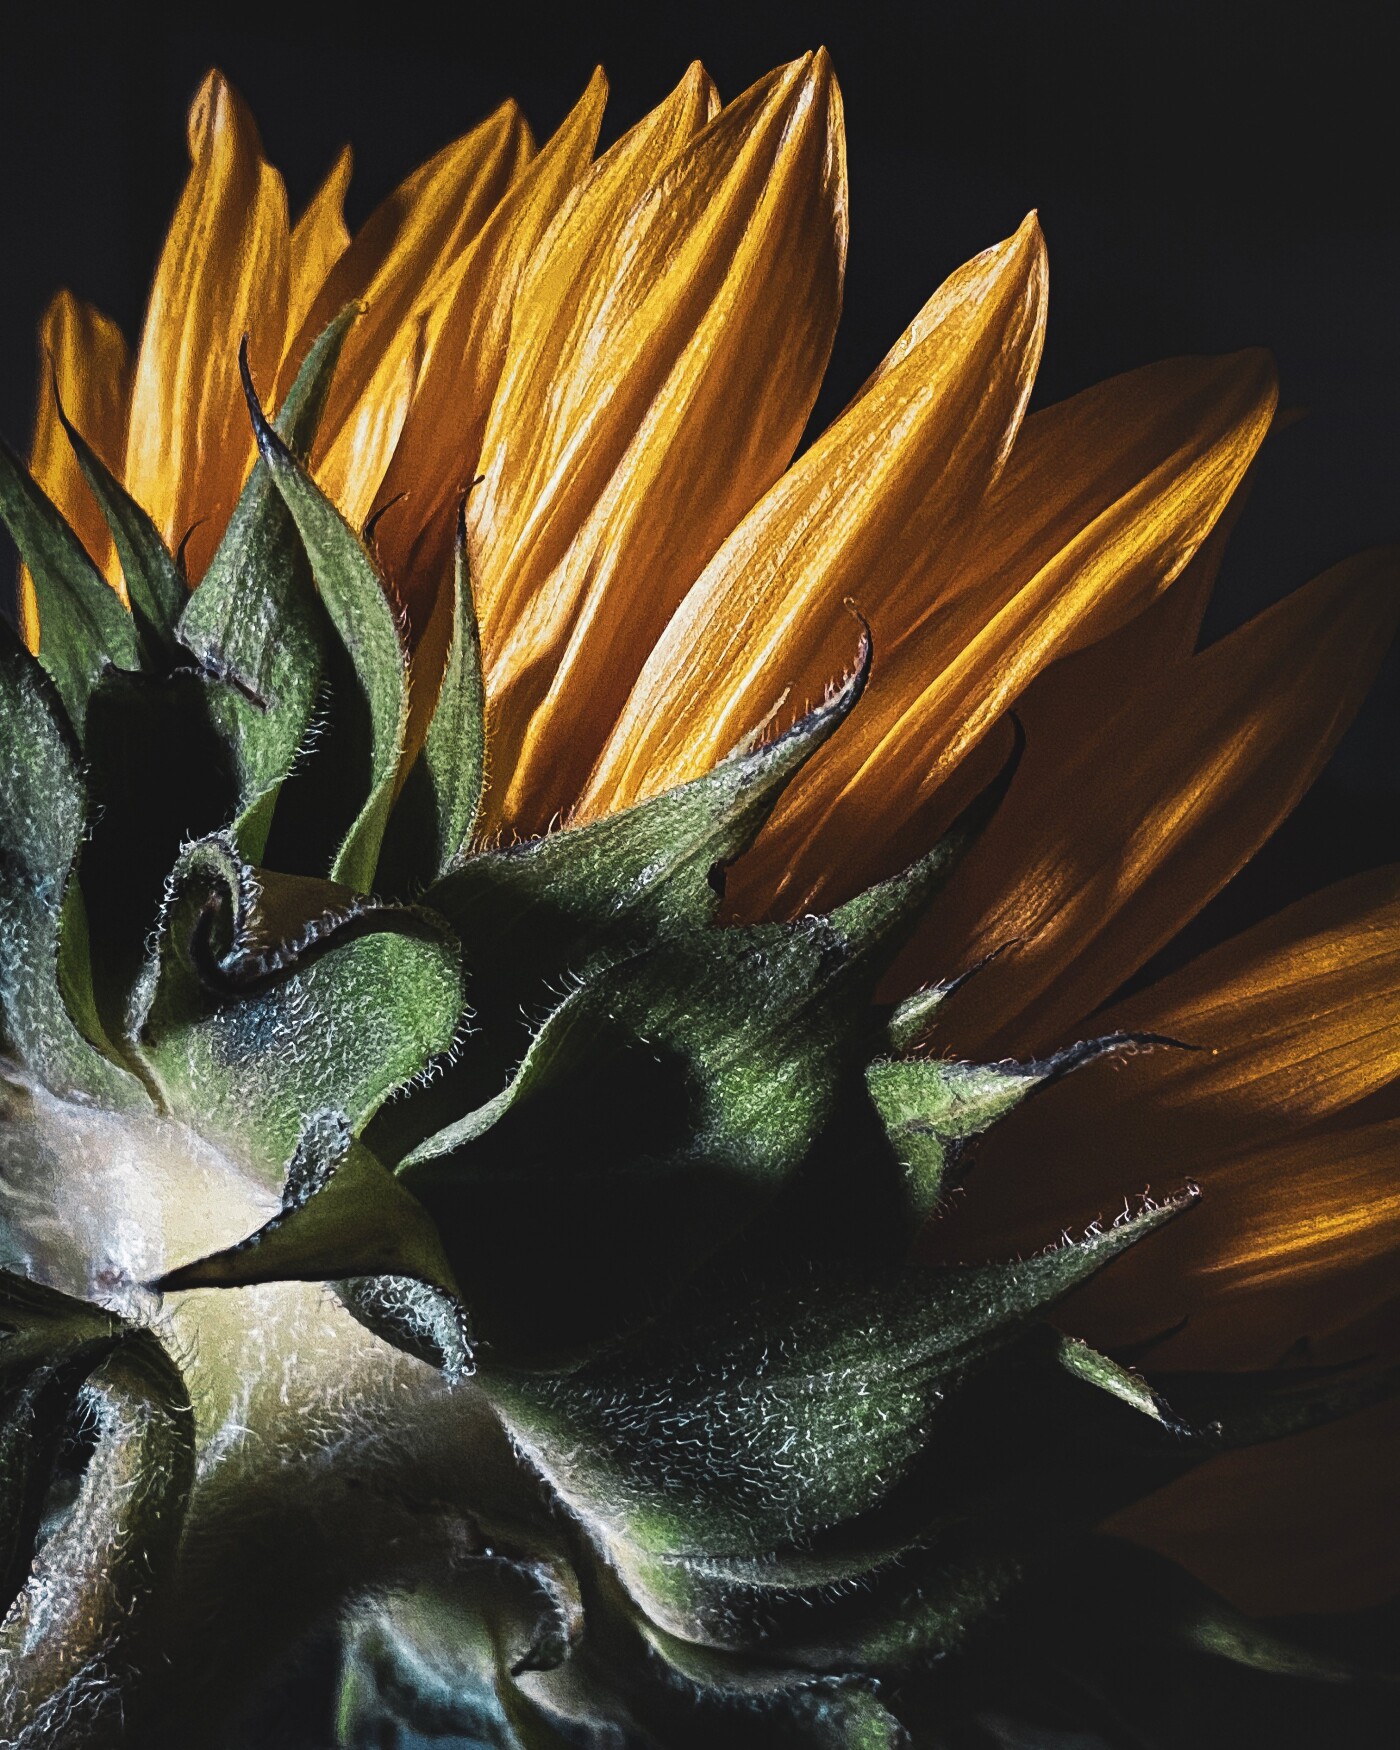 The back of the sunflower is a work of art in itself.  It’s always a wonderful exercise to look at t...